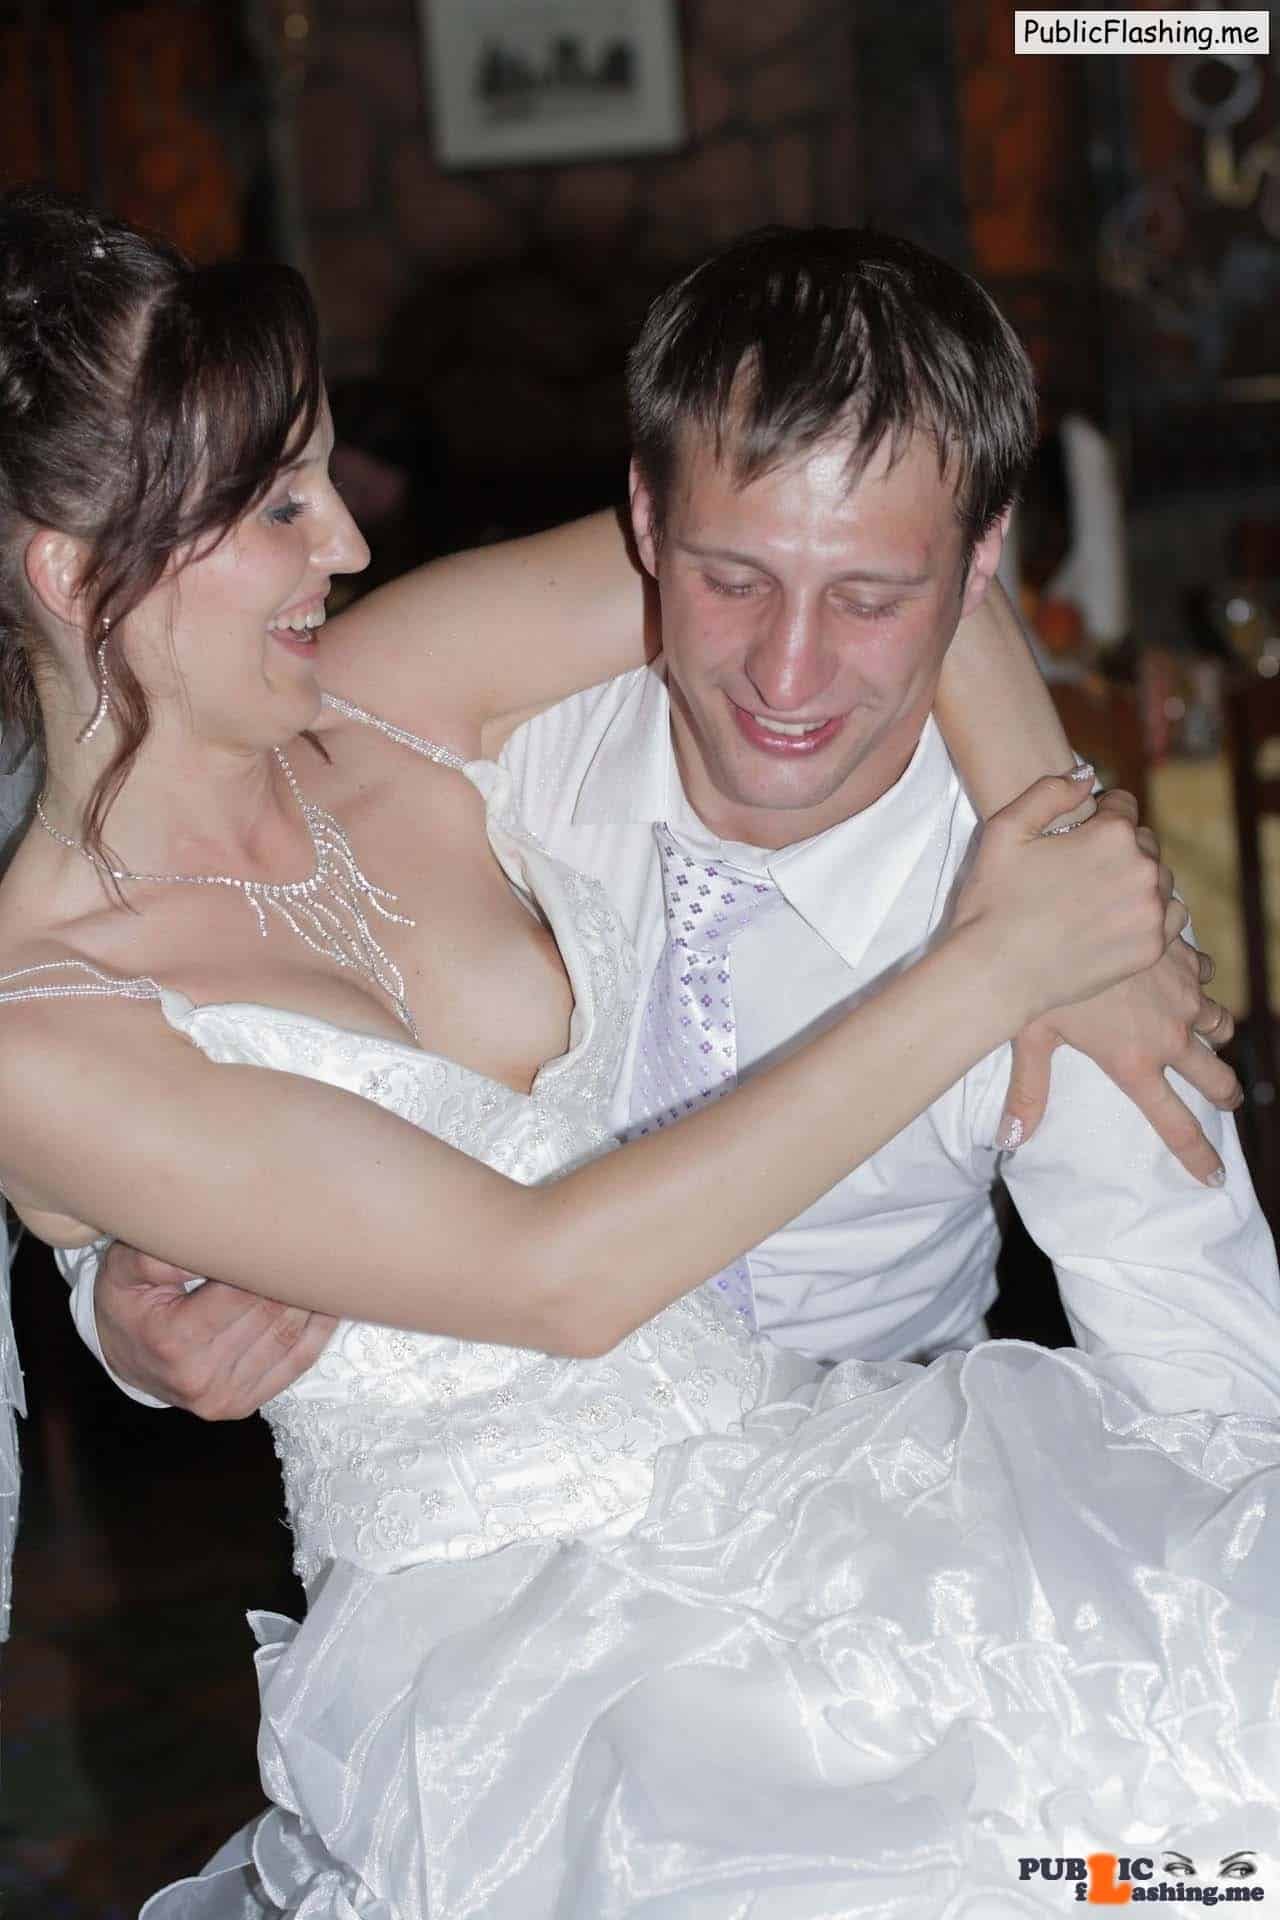 Amateur: Accidental nipple slip on wedding Embarrassing photo of the English bride where her naughty nipple got caught by camera lens. While she was being carried by her broom her light brown nipple popped out of the decolletage. This put a...